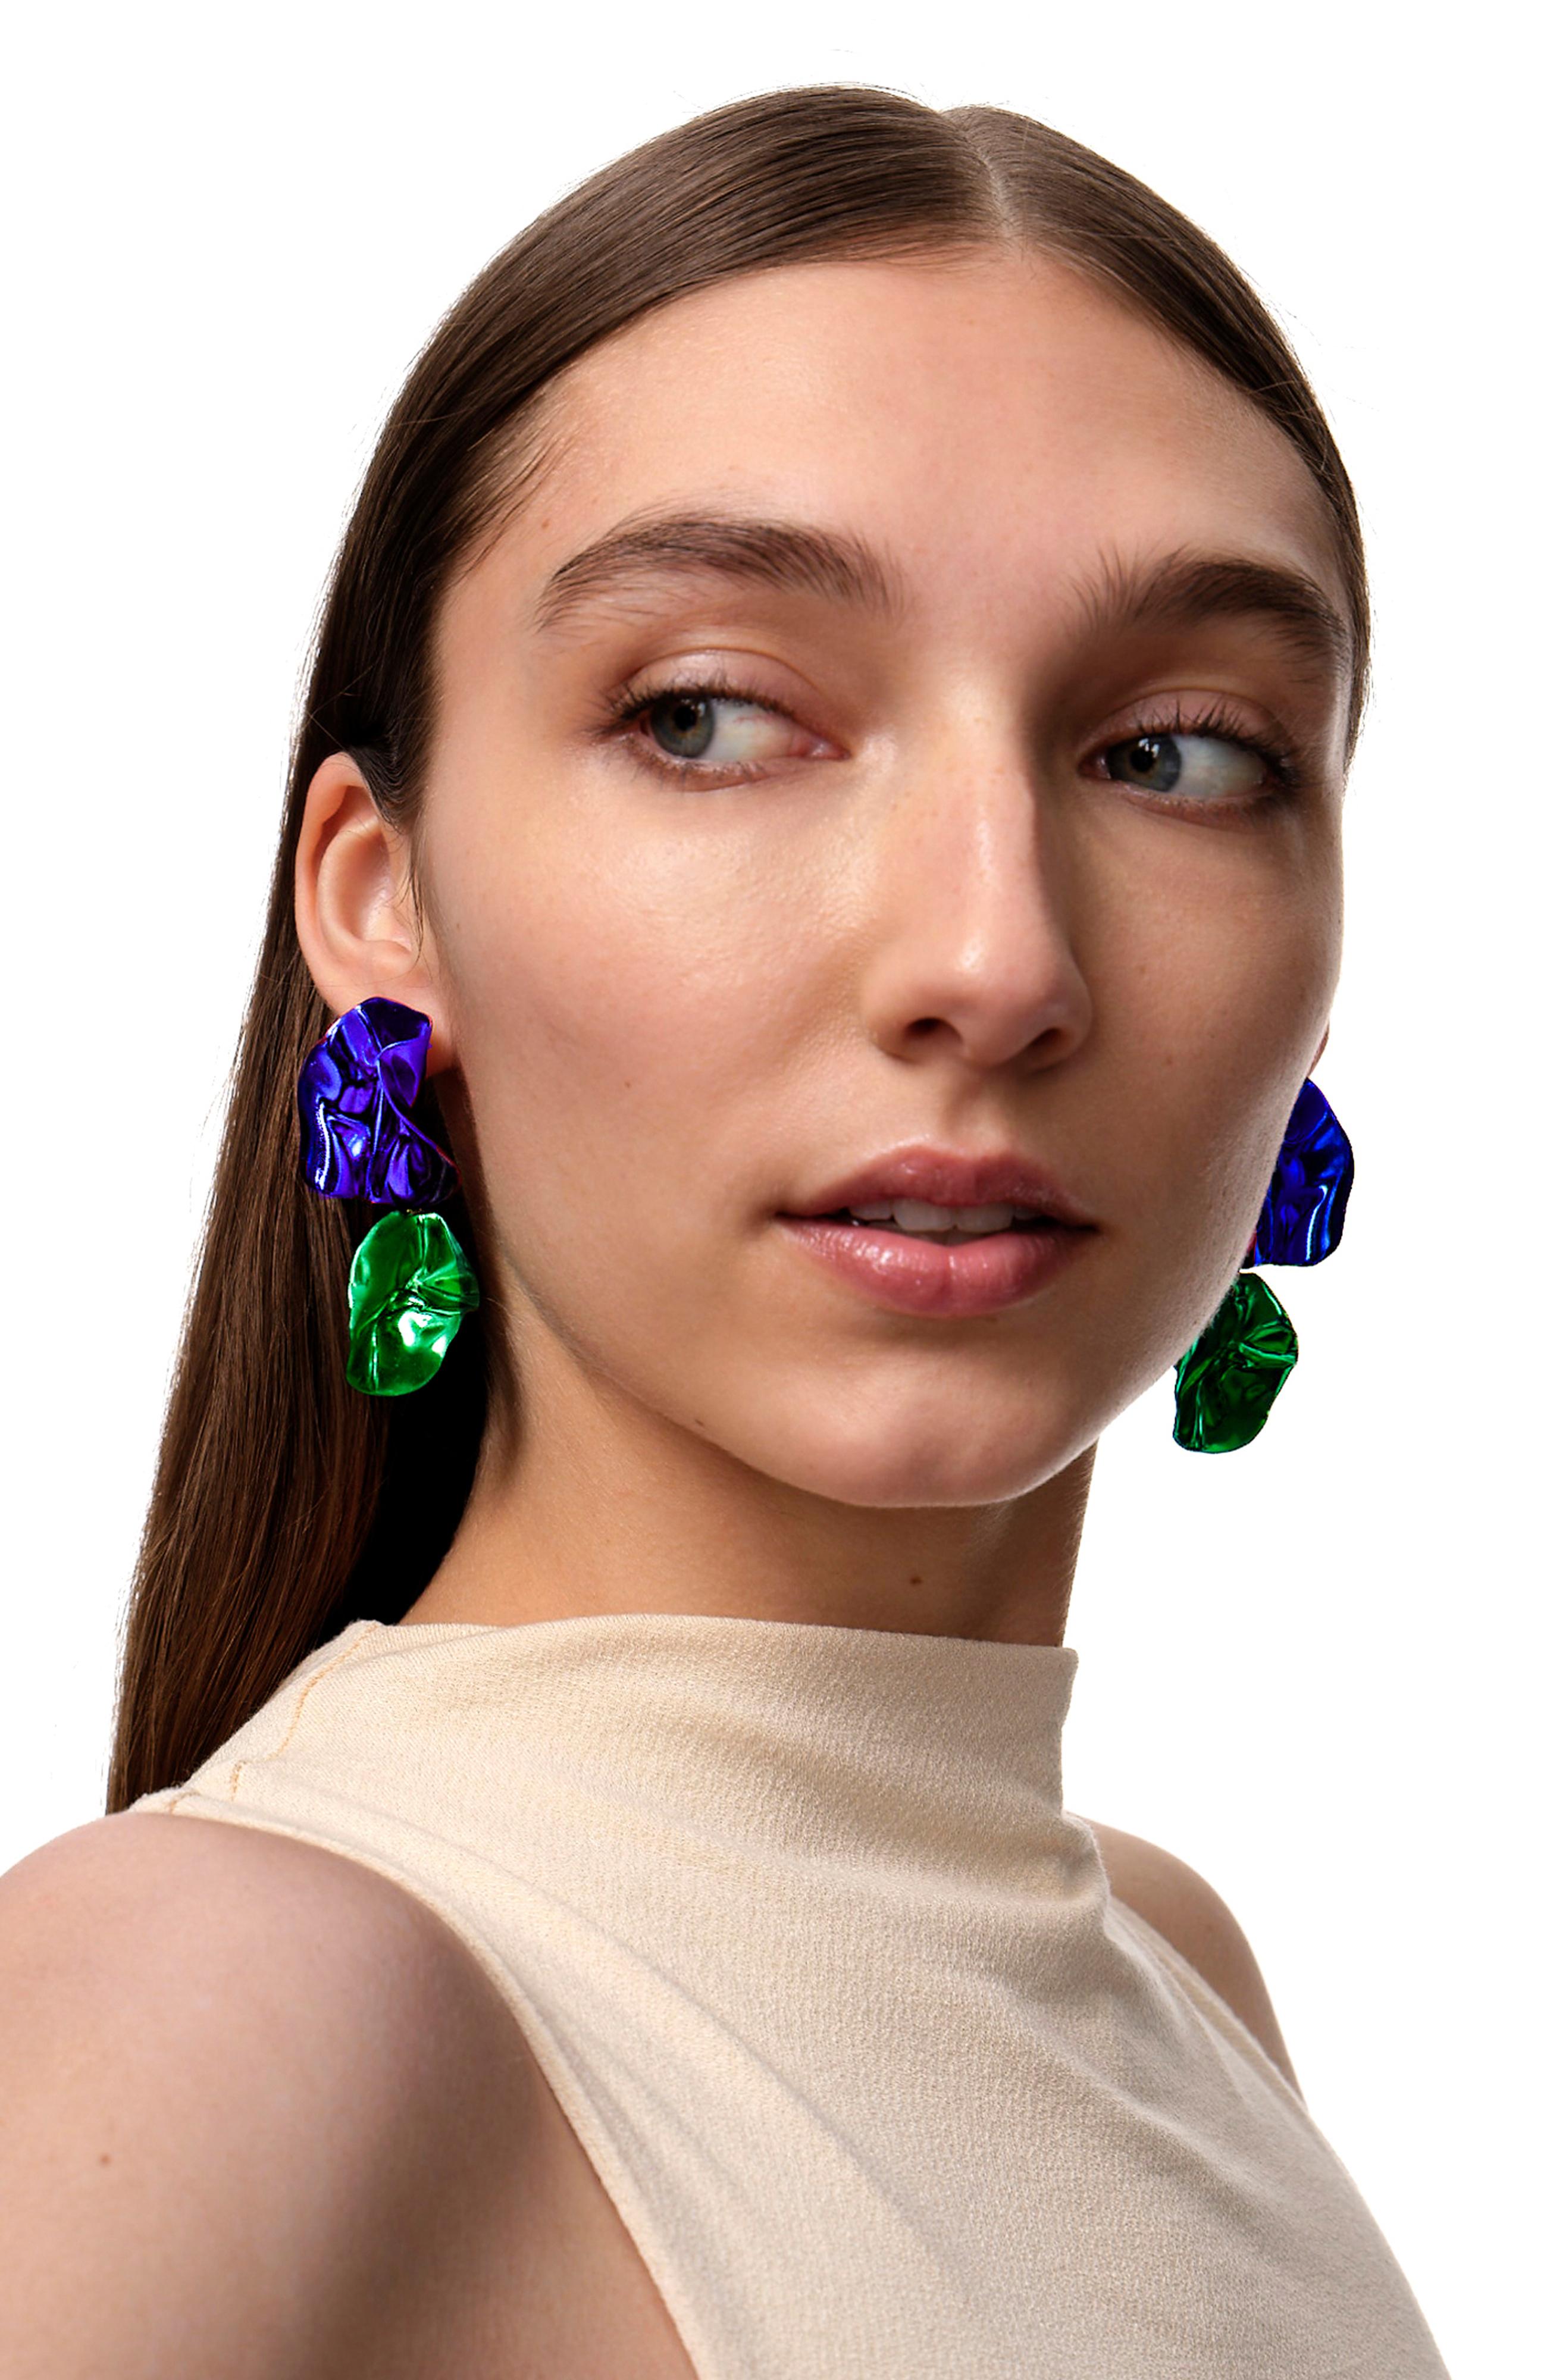 The Fold Earrings are sculptural folded earrings in vibrant metallic Cobalt Blue and Emerald Green. Their intricate folds are highlighted by the high-polished Mirror Finish. Wear them for a pop of color this fall.

Ceramic coated
Sterling silver